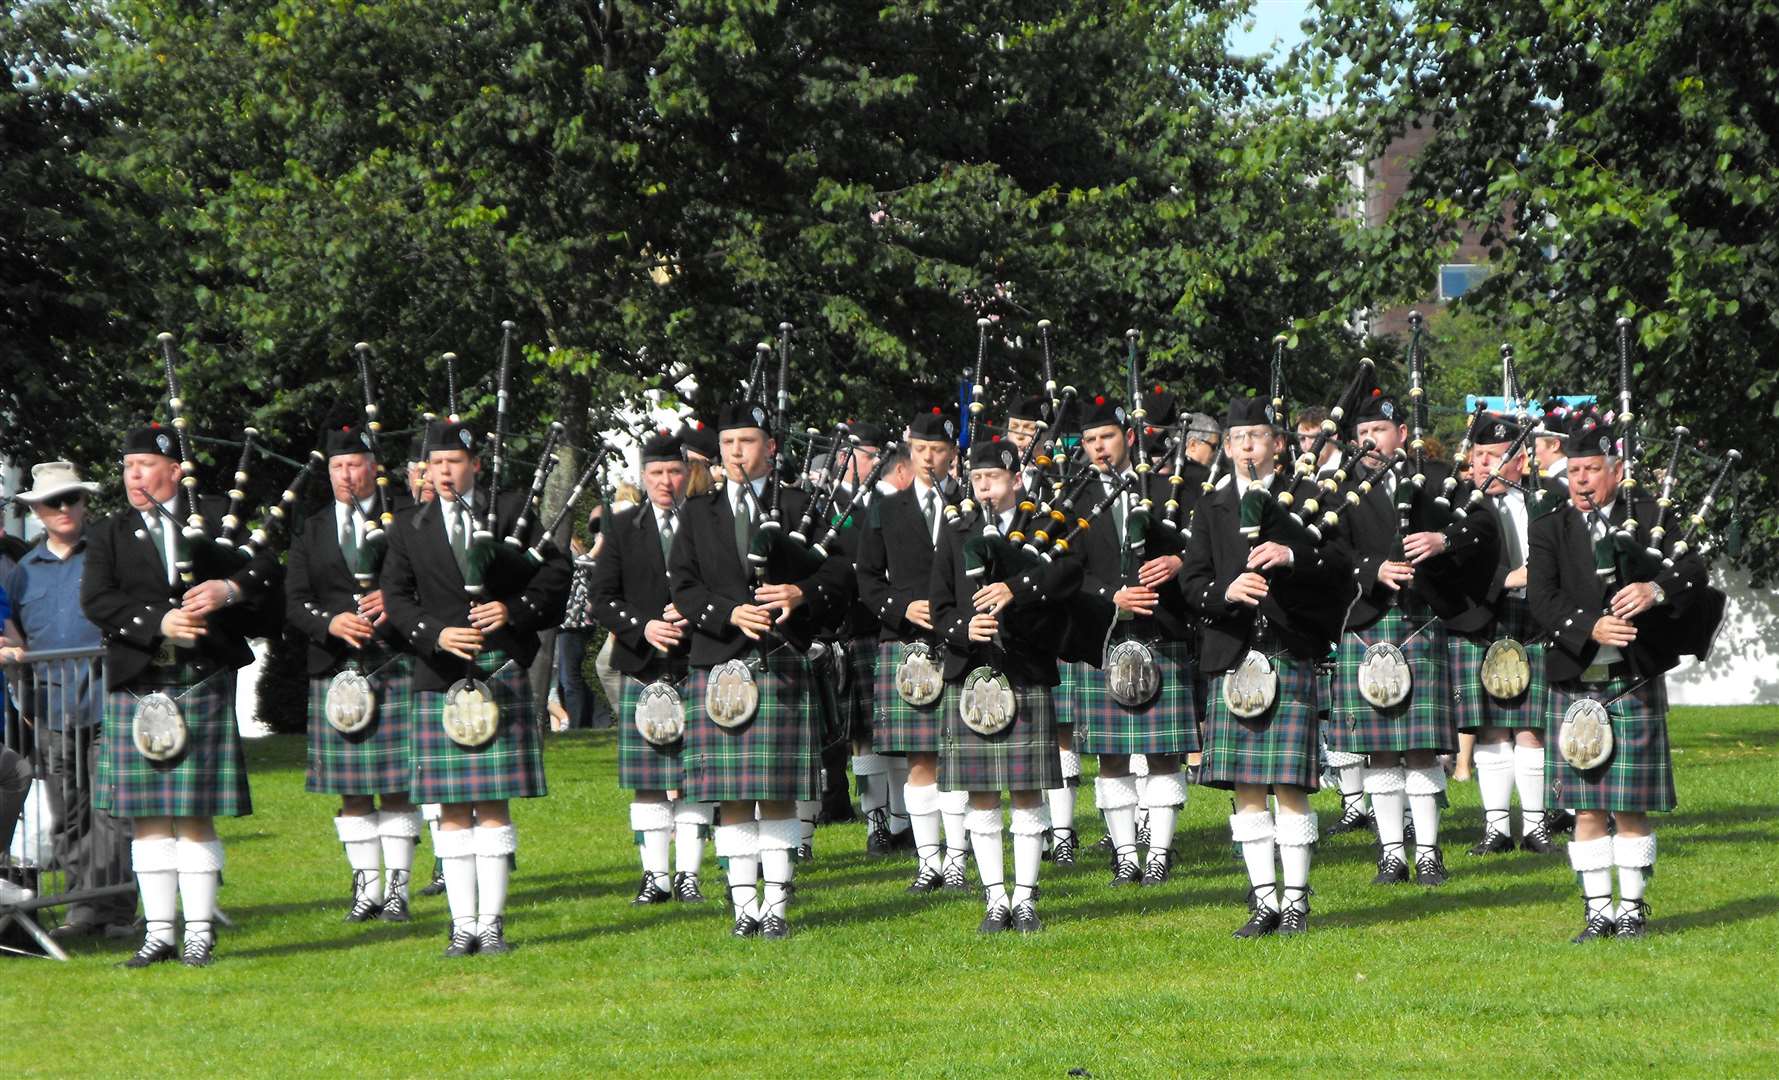 Dornoch Pipe Band are set to return after a two year break with a parade starting at Dornoch Square on May 28.